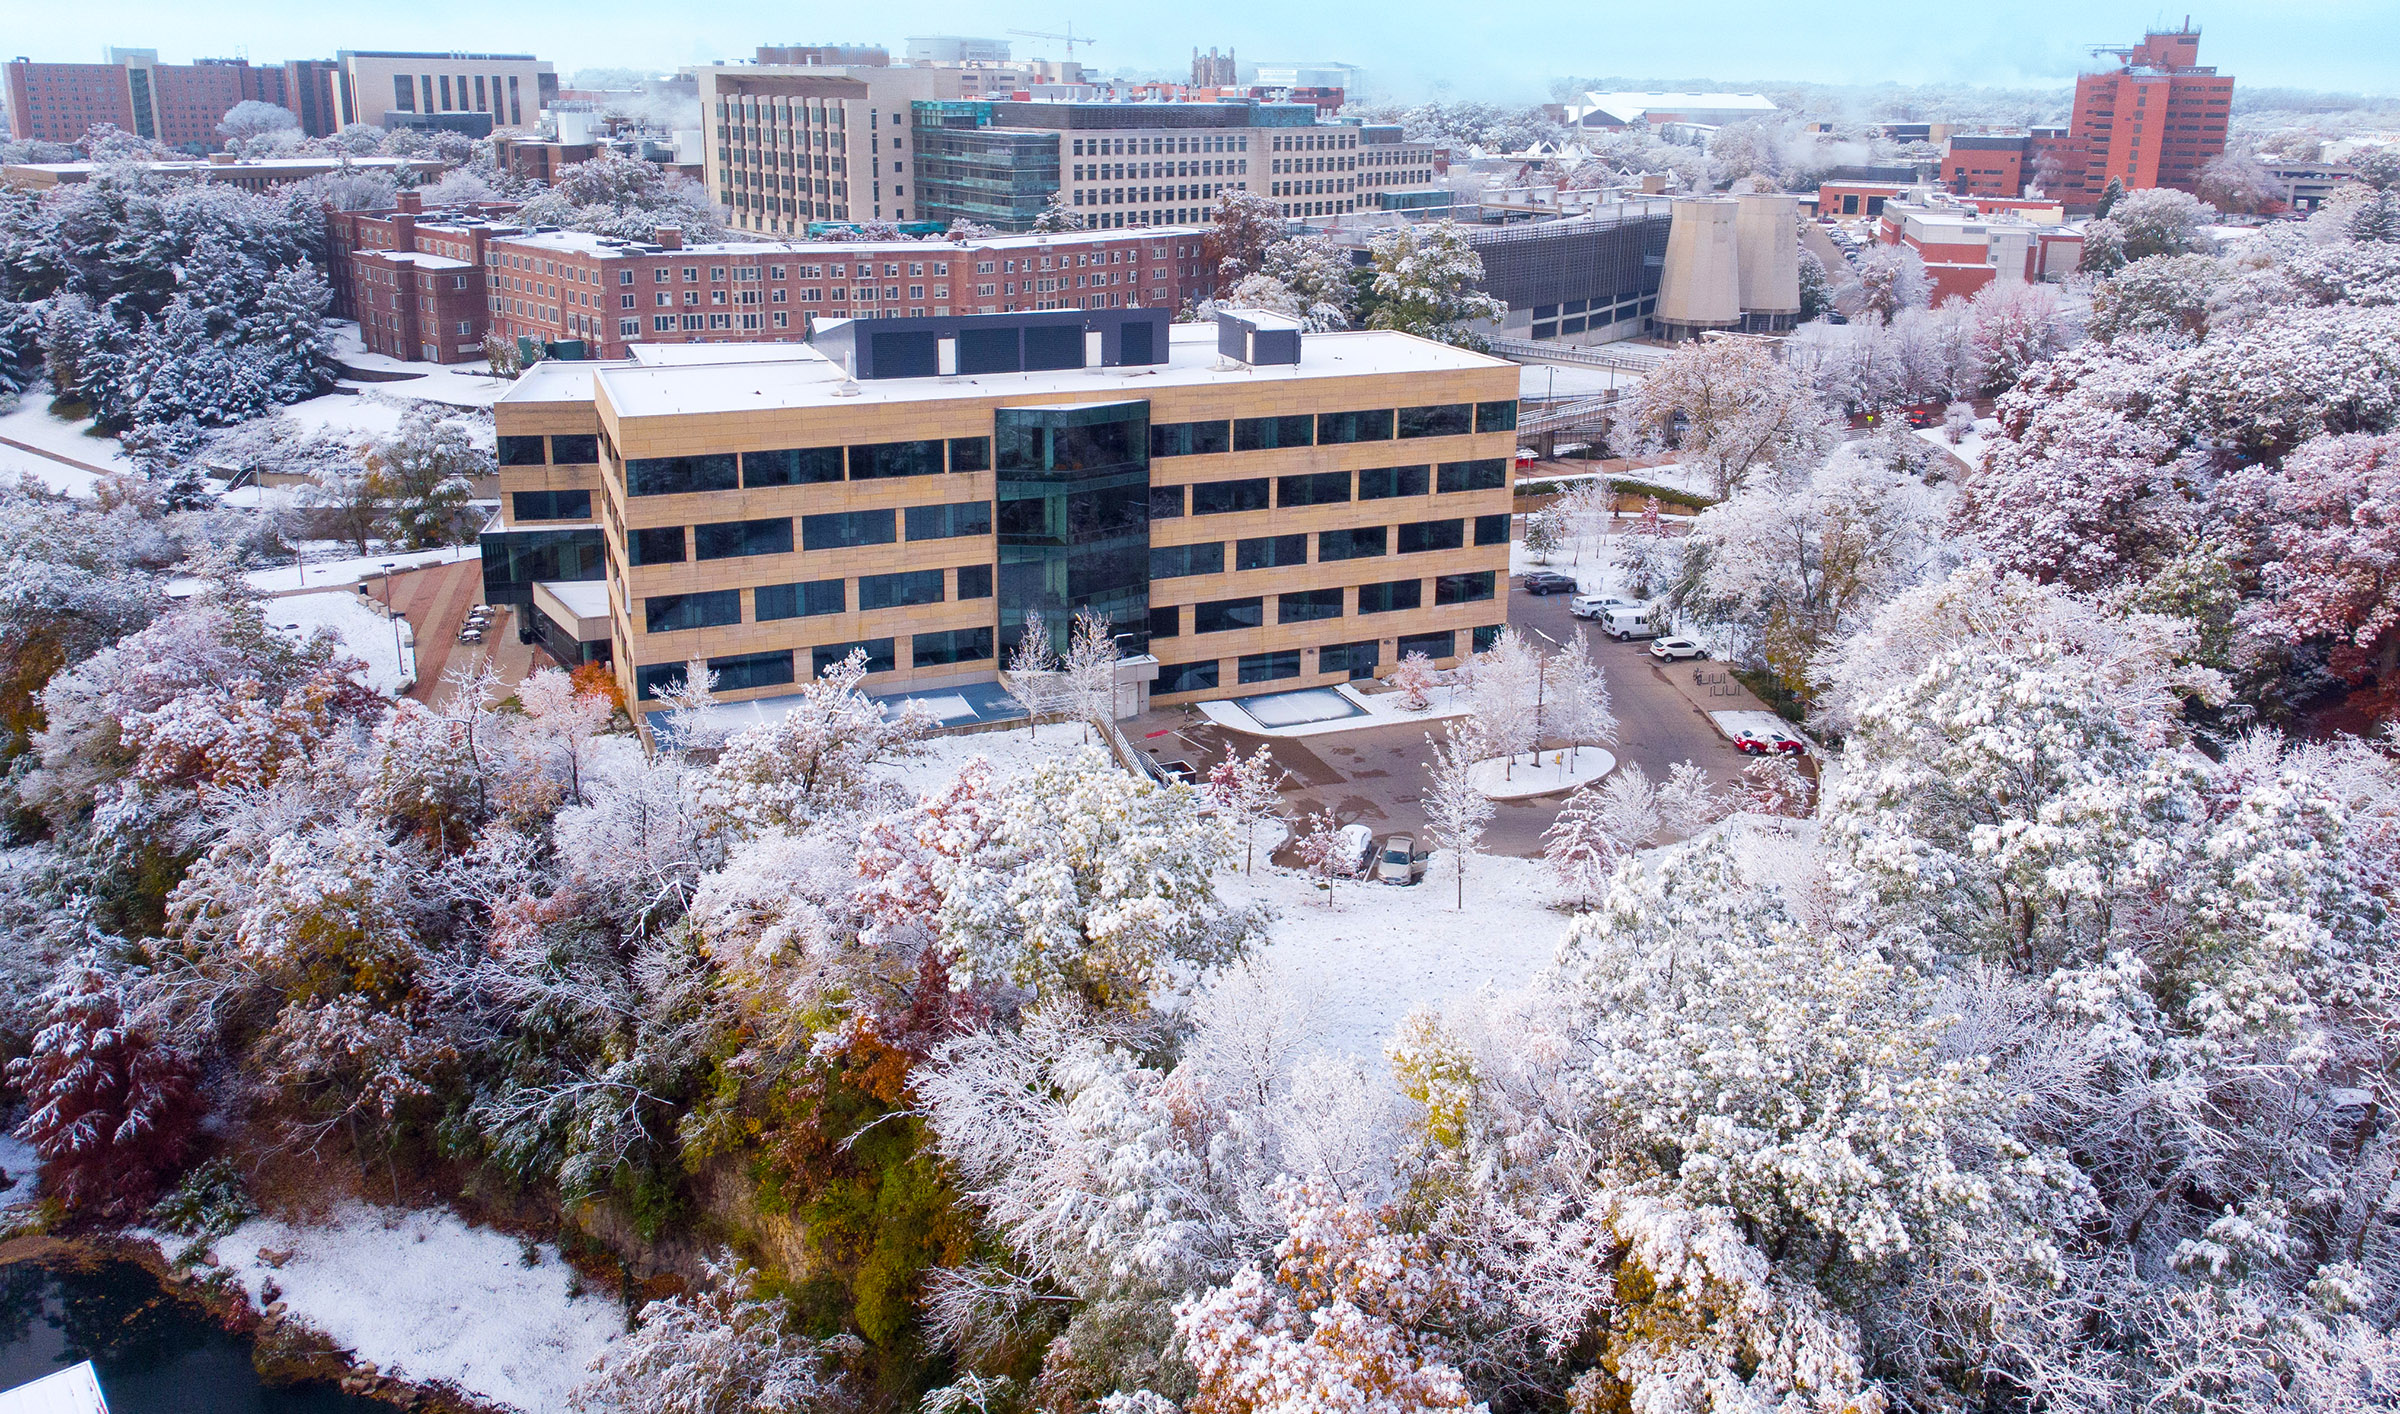 The University of Iowa College of Public Health Building (CPHB) seen from above with a covering of snow.